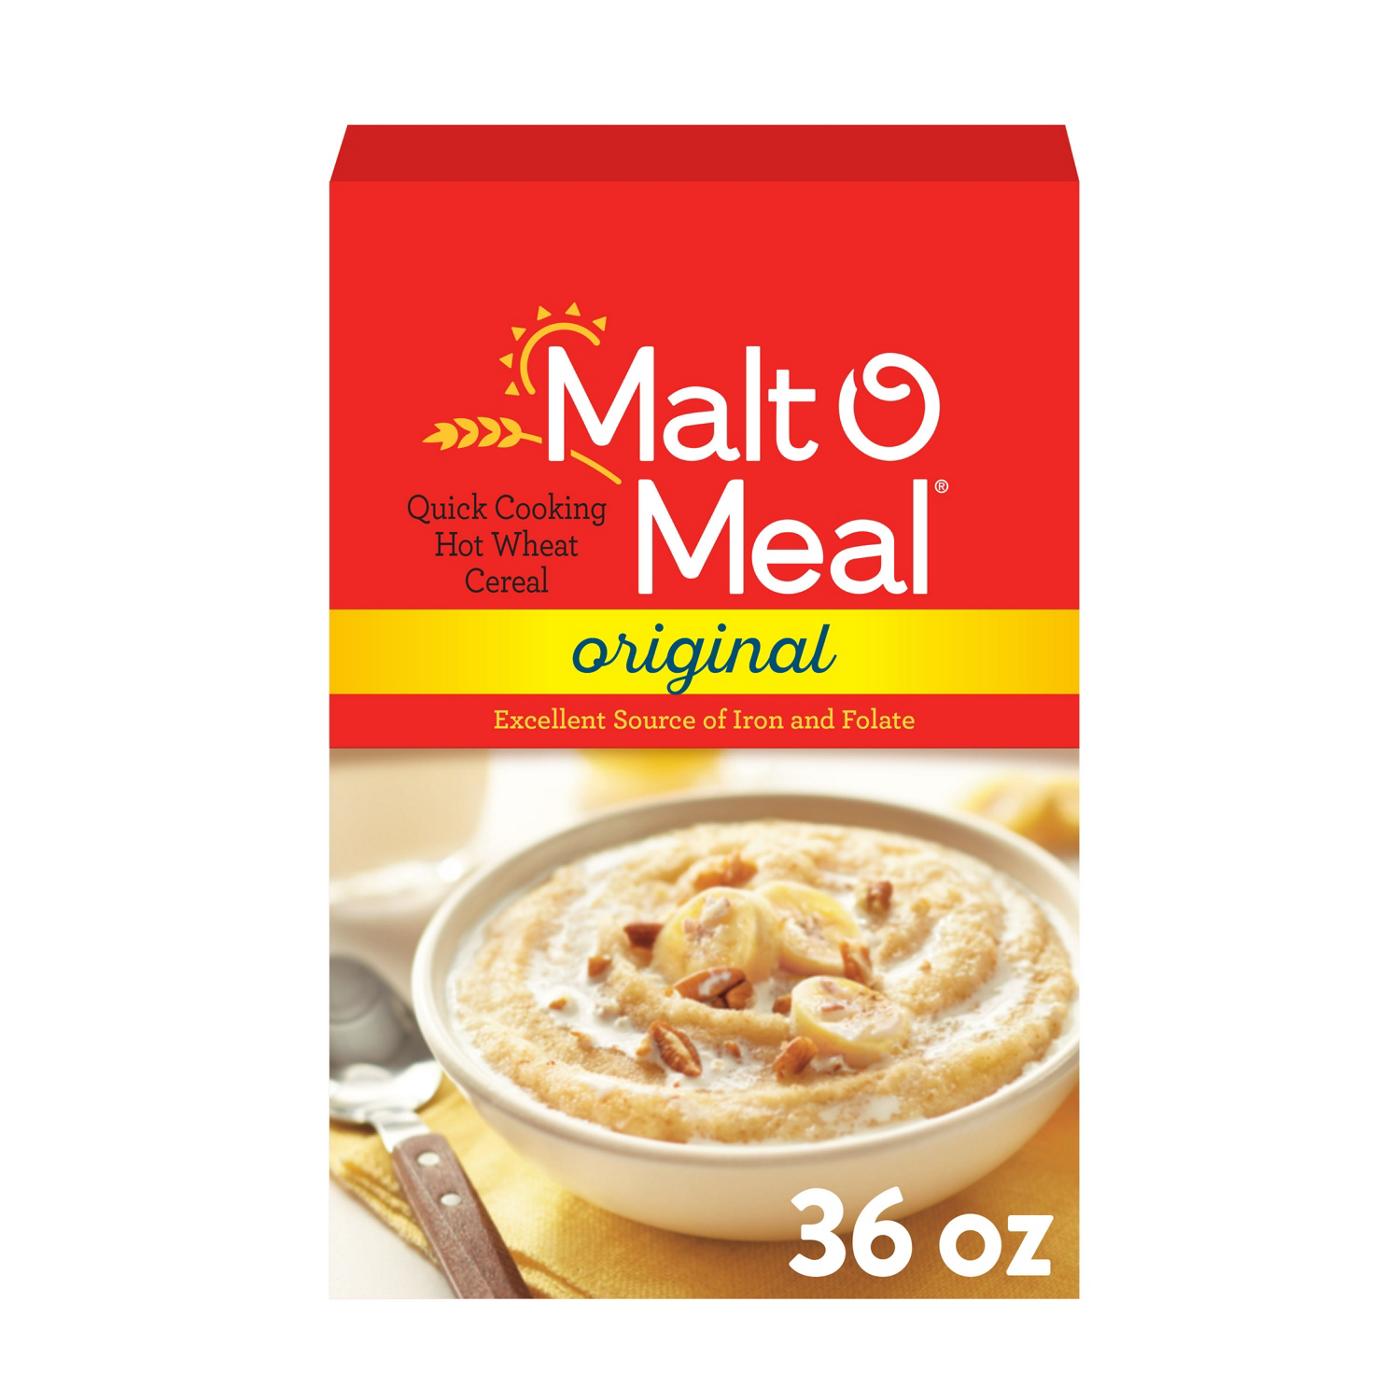 Malt-O-Meal Quick Cooking Original Hot Wheat Cereal; image 1 of 2